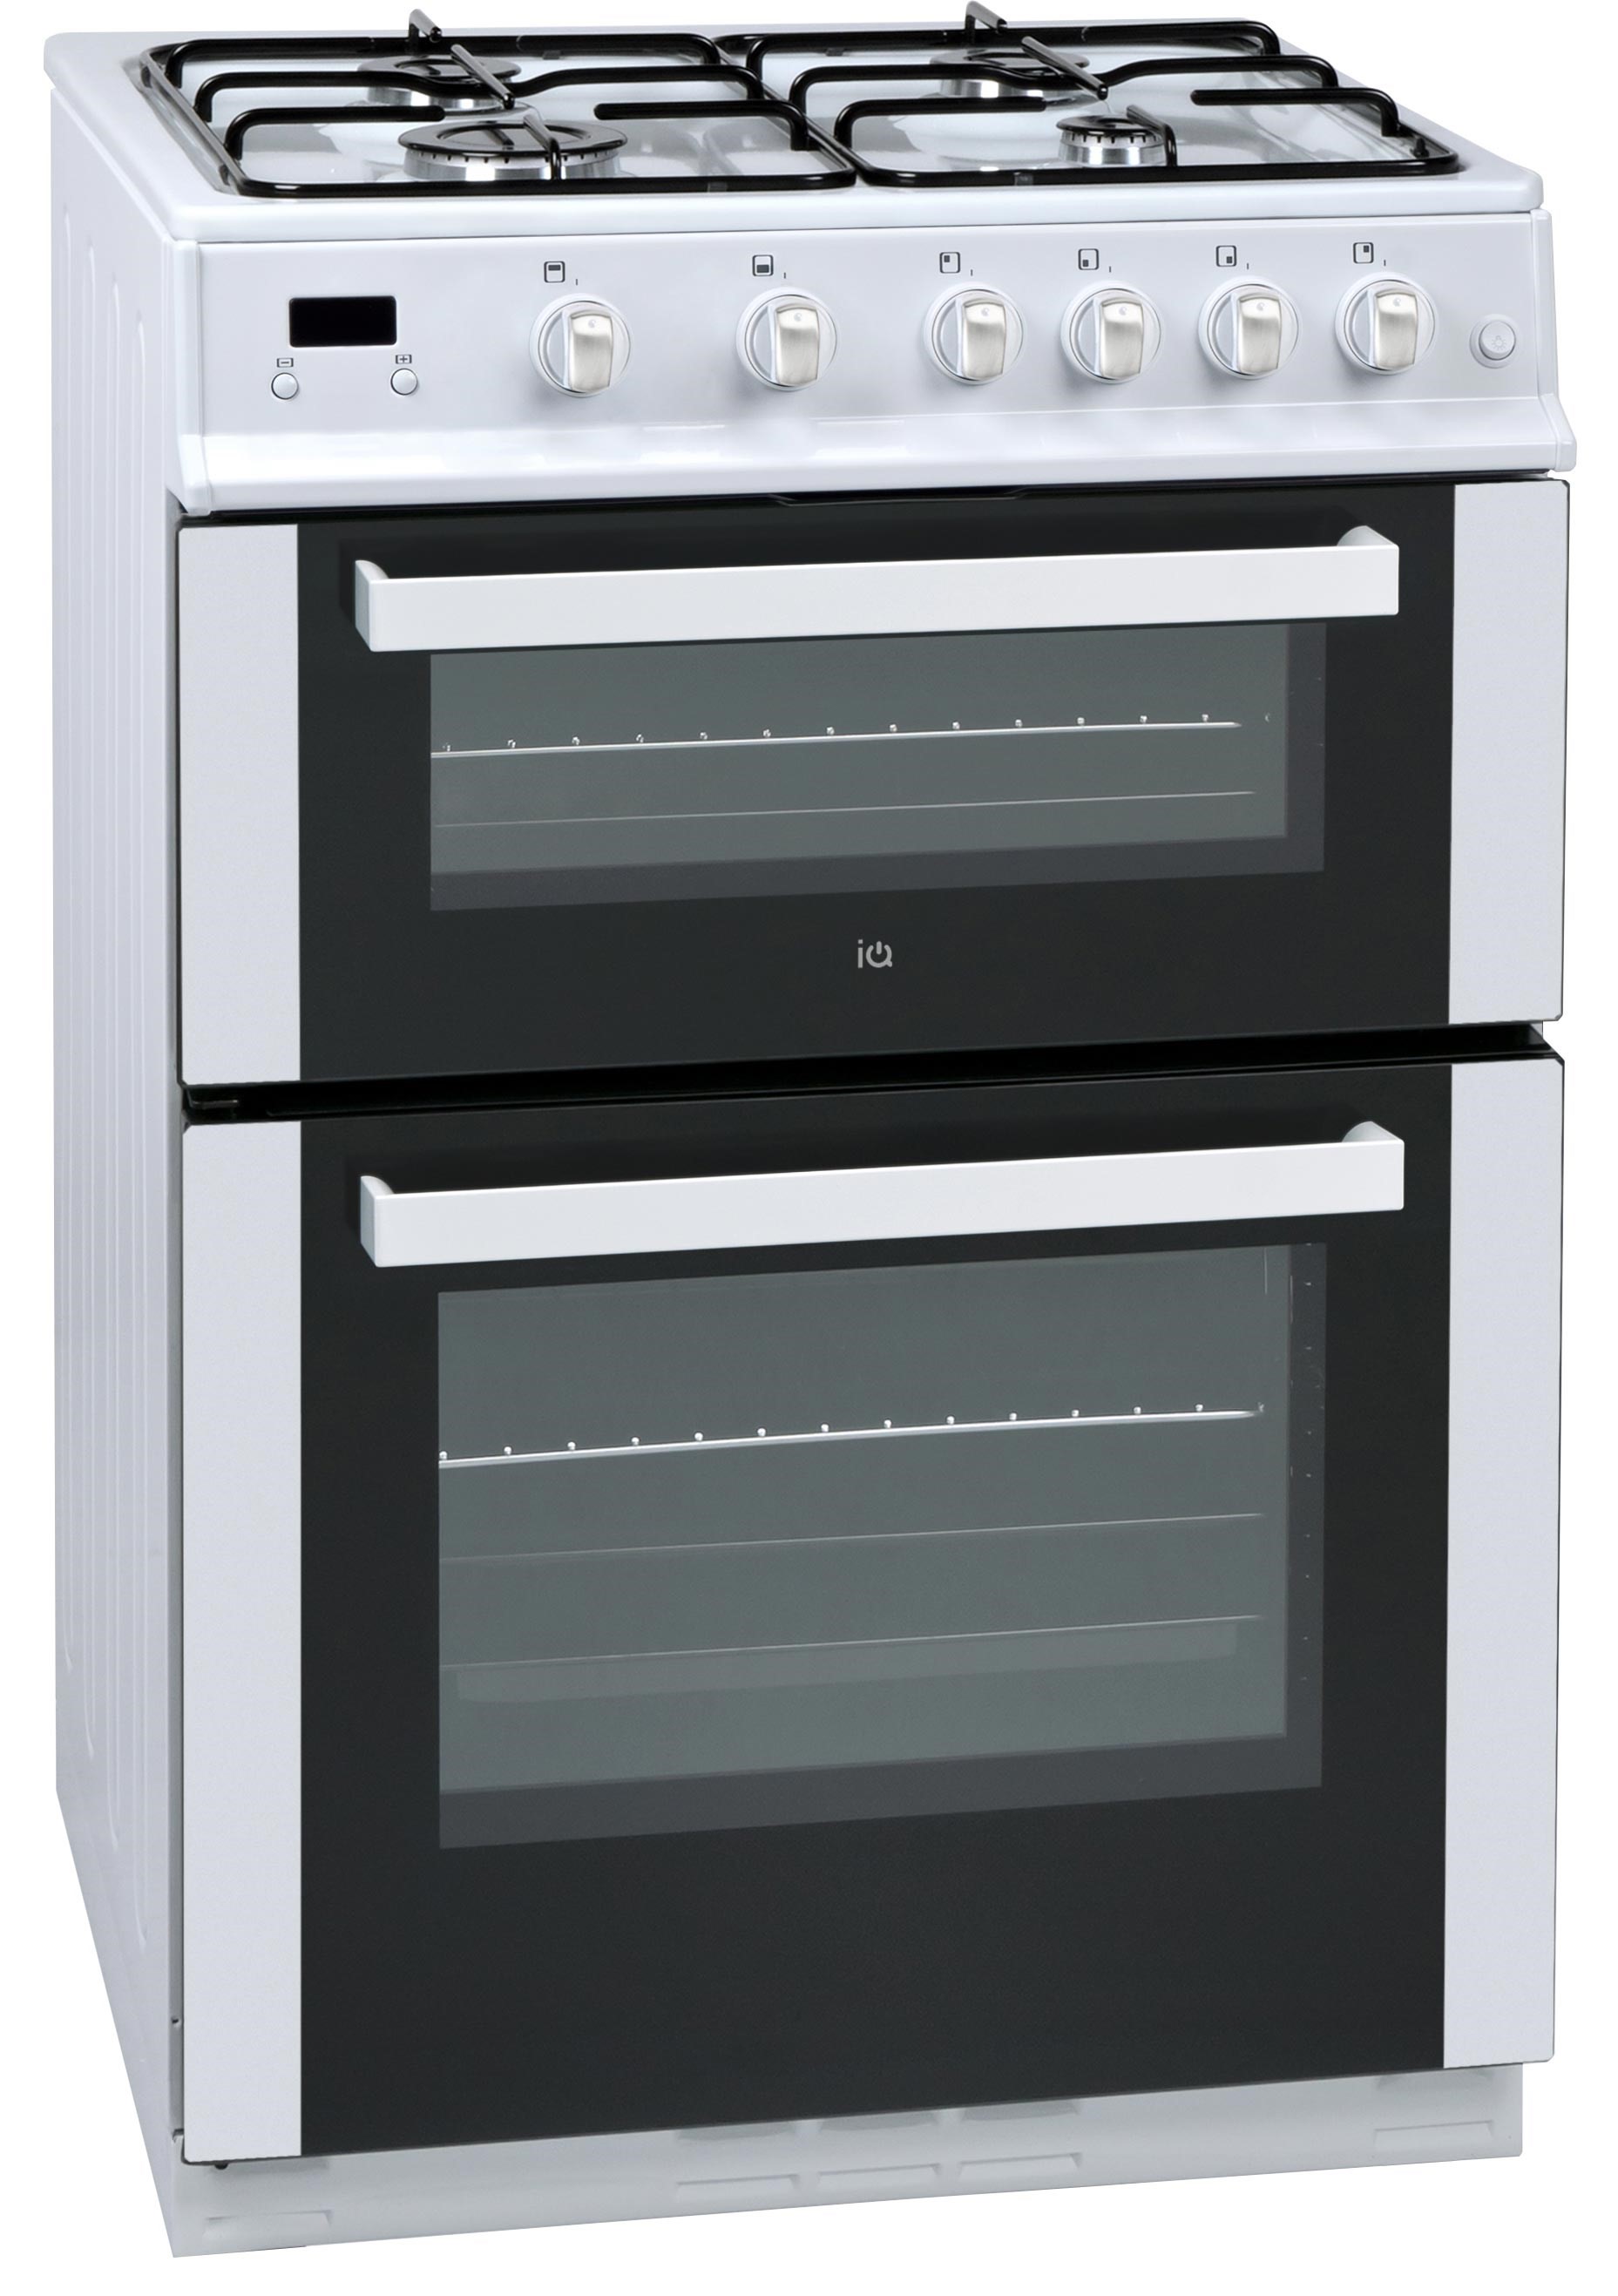 IQGC3W60 double oven gas cooker